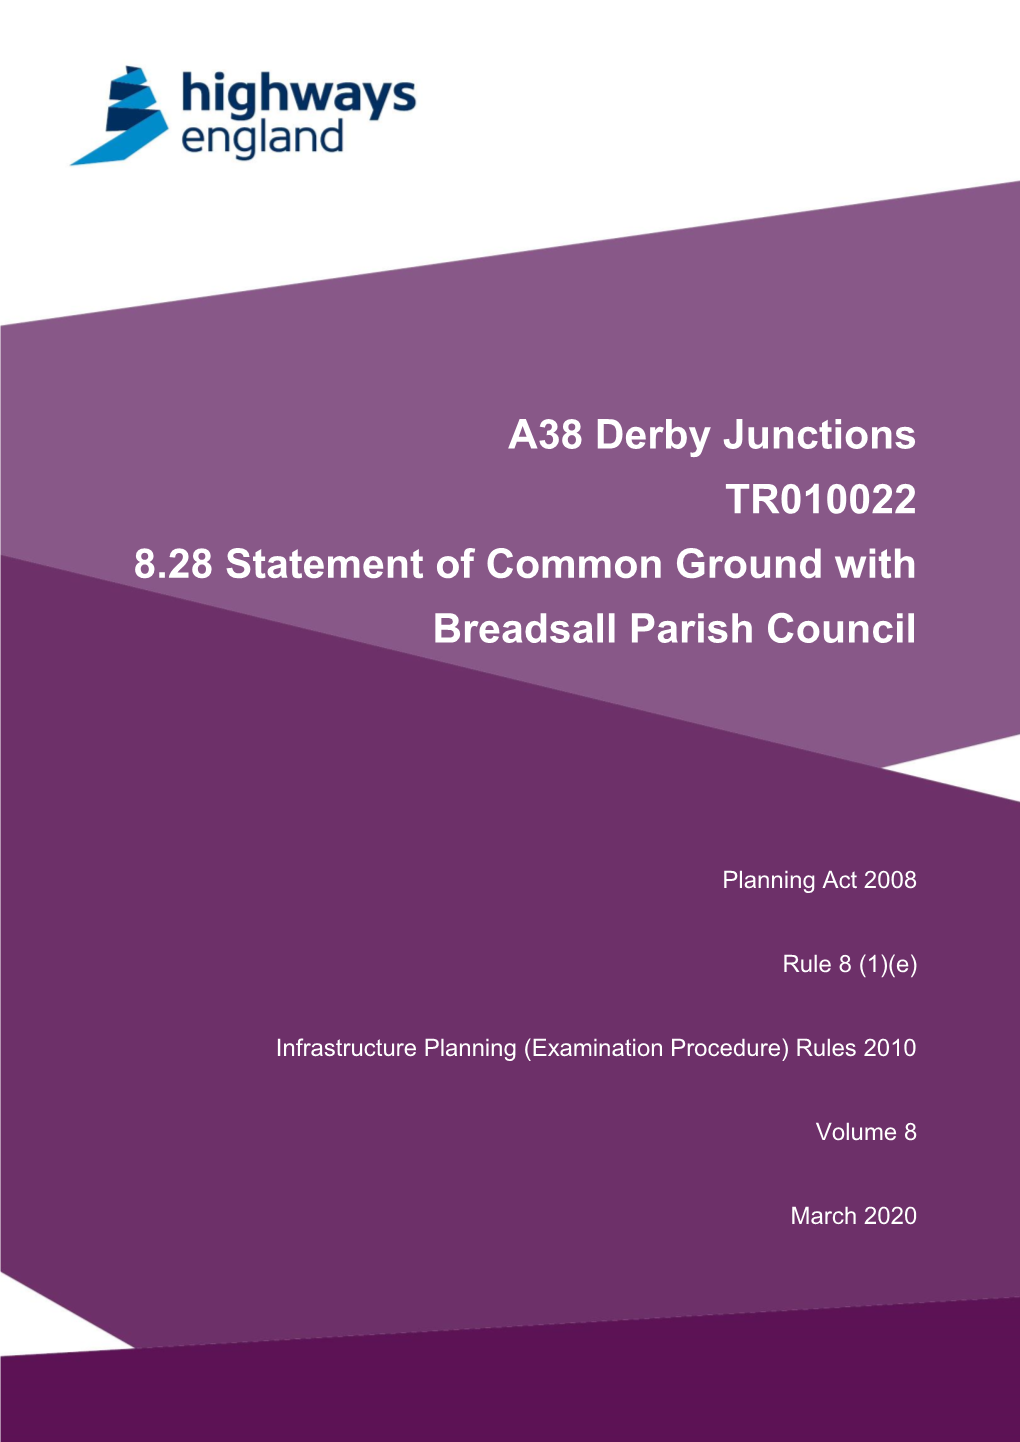 A38 Derby Junctions TR010022 8.28 Statement of Common Ground with Breadsall Parish Council